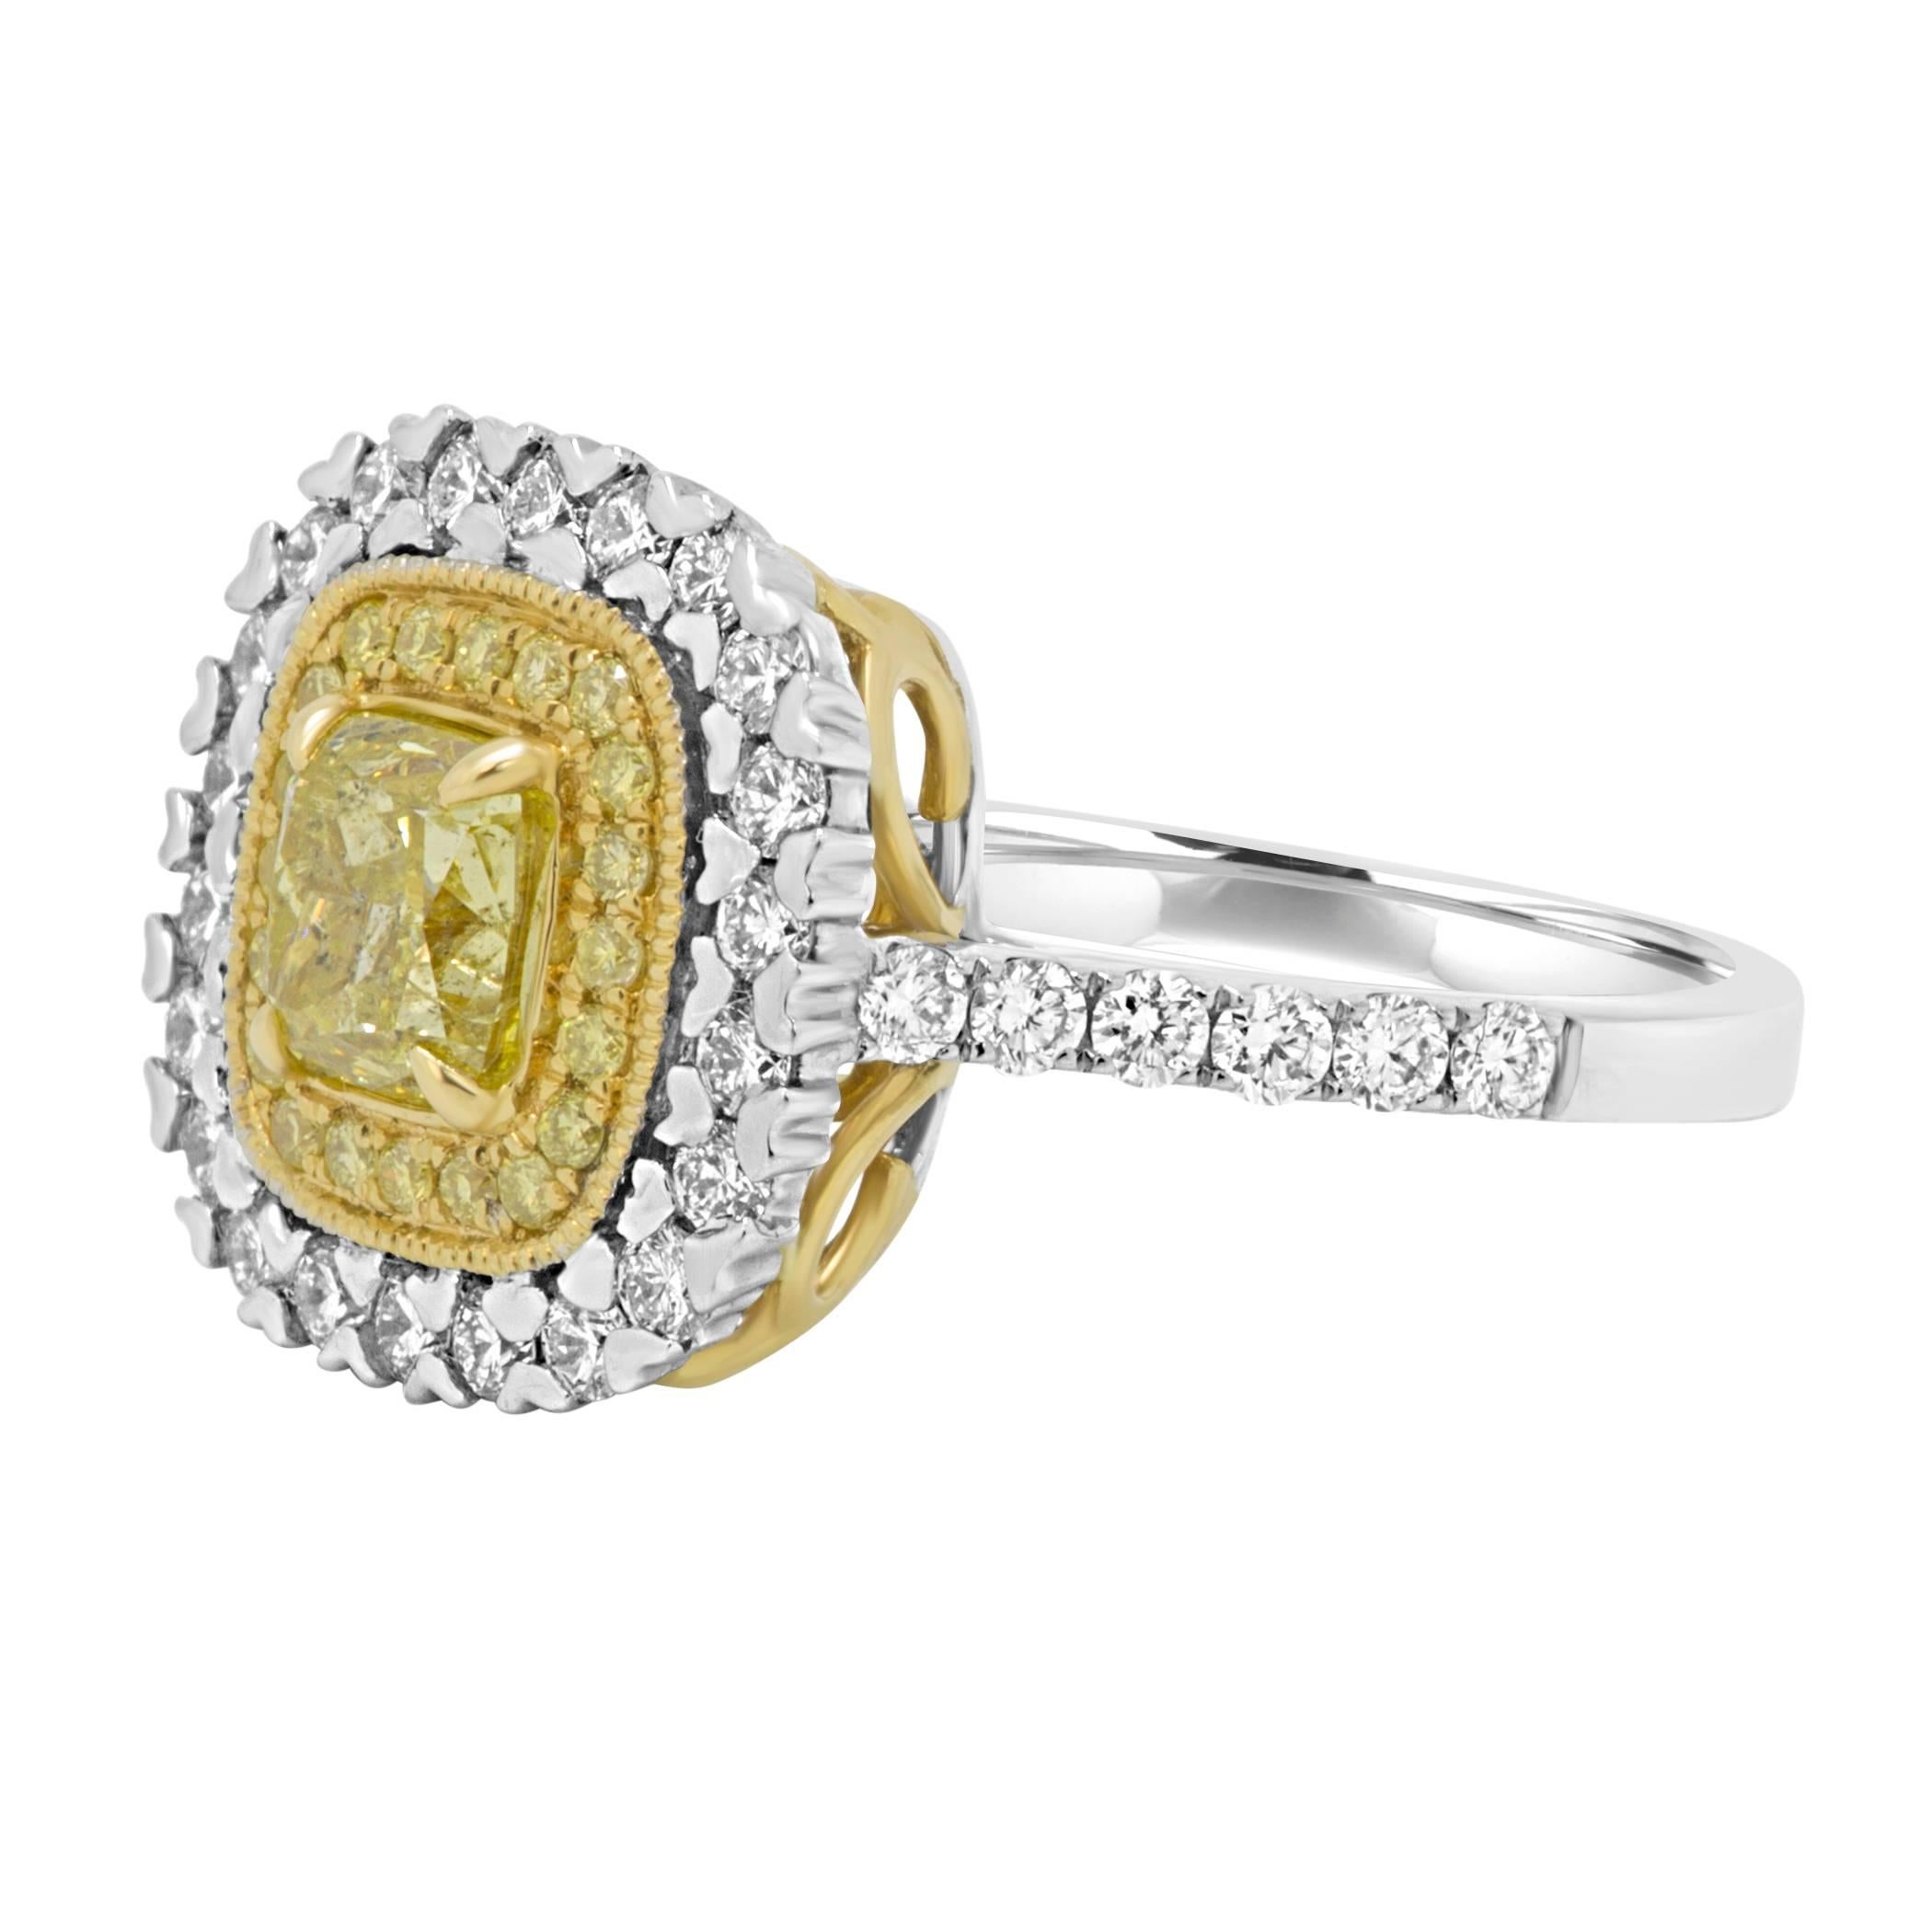 Natural Fancy Yellow Diamond Cushion 0.72 Carat encircled in a double Halo of Natural Fancy Yellow Diamond Rounds 0.15 Carat and White Diamond Rounds 0.67 Carat in 18K White and Yellow Gold Bridal and Fashion Ring.

Style available in different